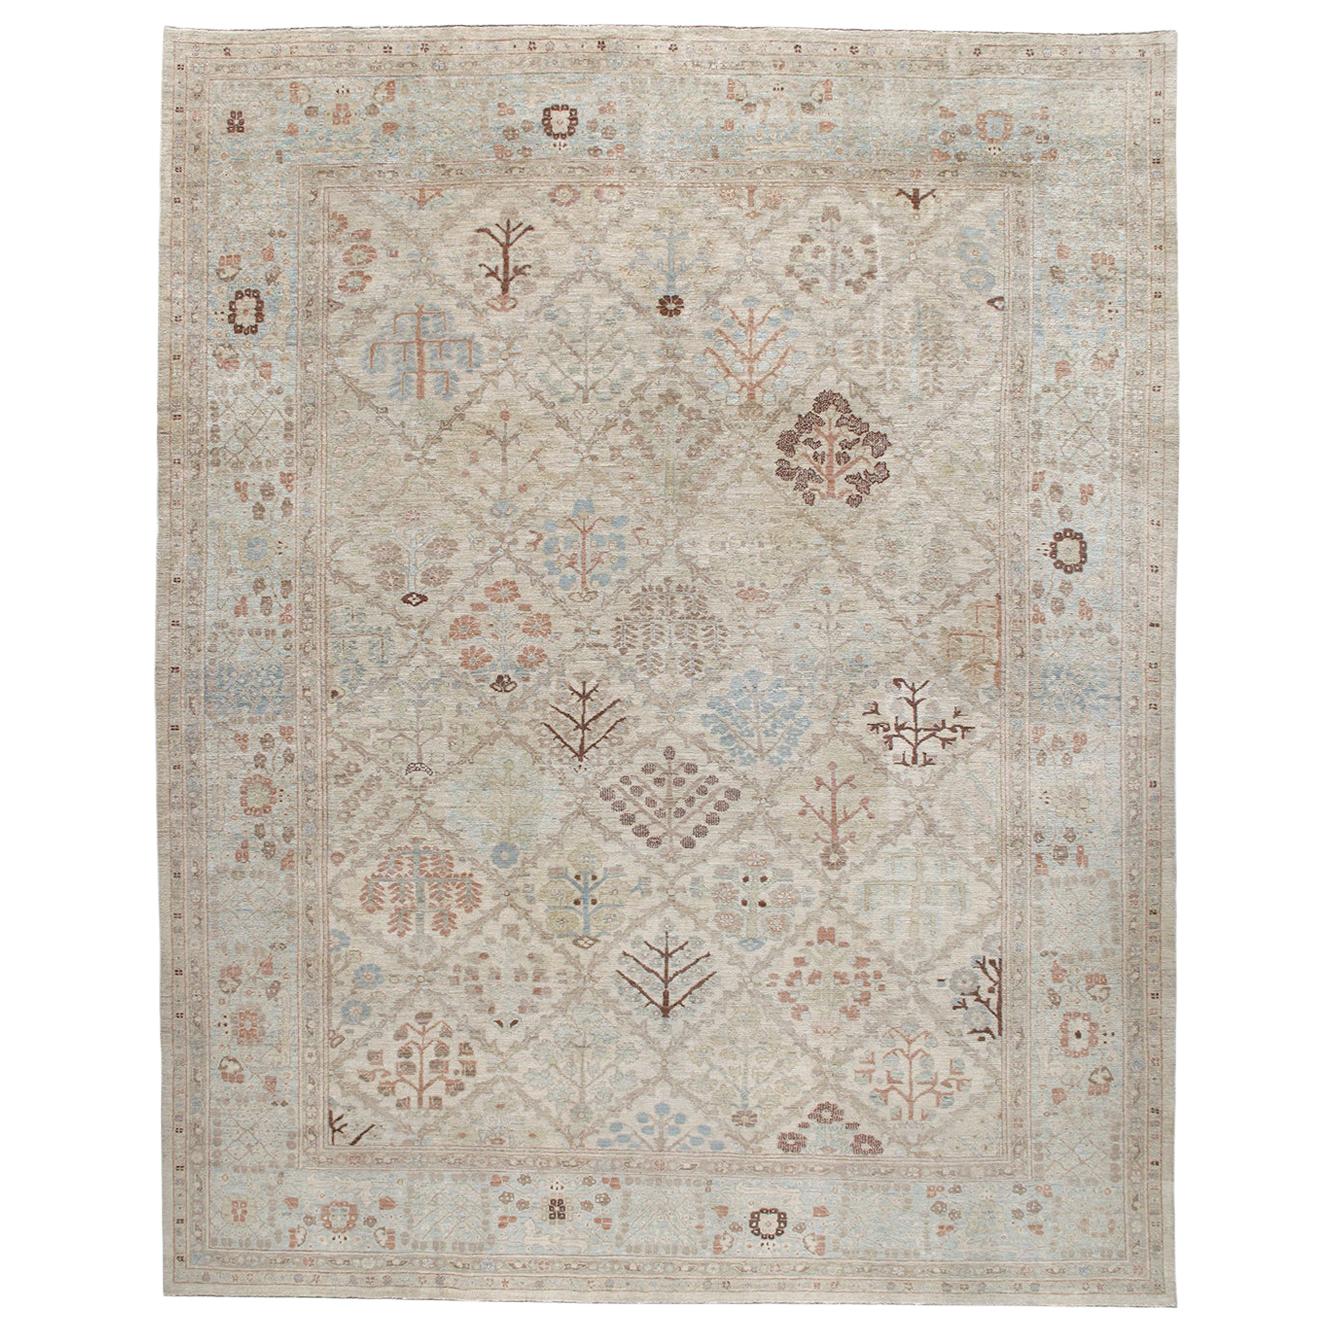 Persian Kurdish Decorative Hand Knotted Rug in Ivory and Beige Color